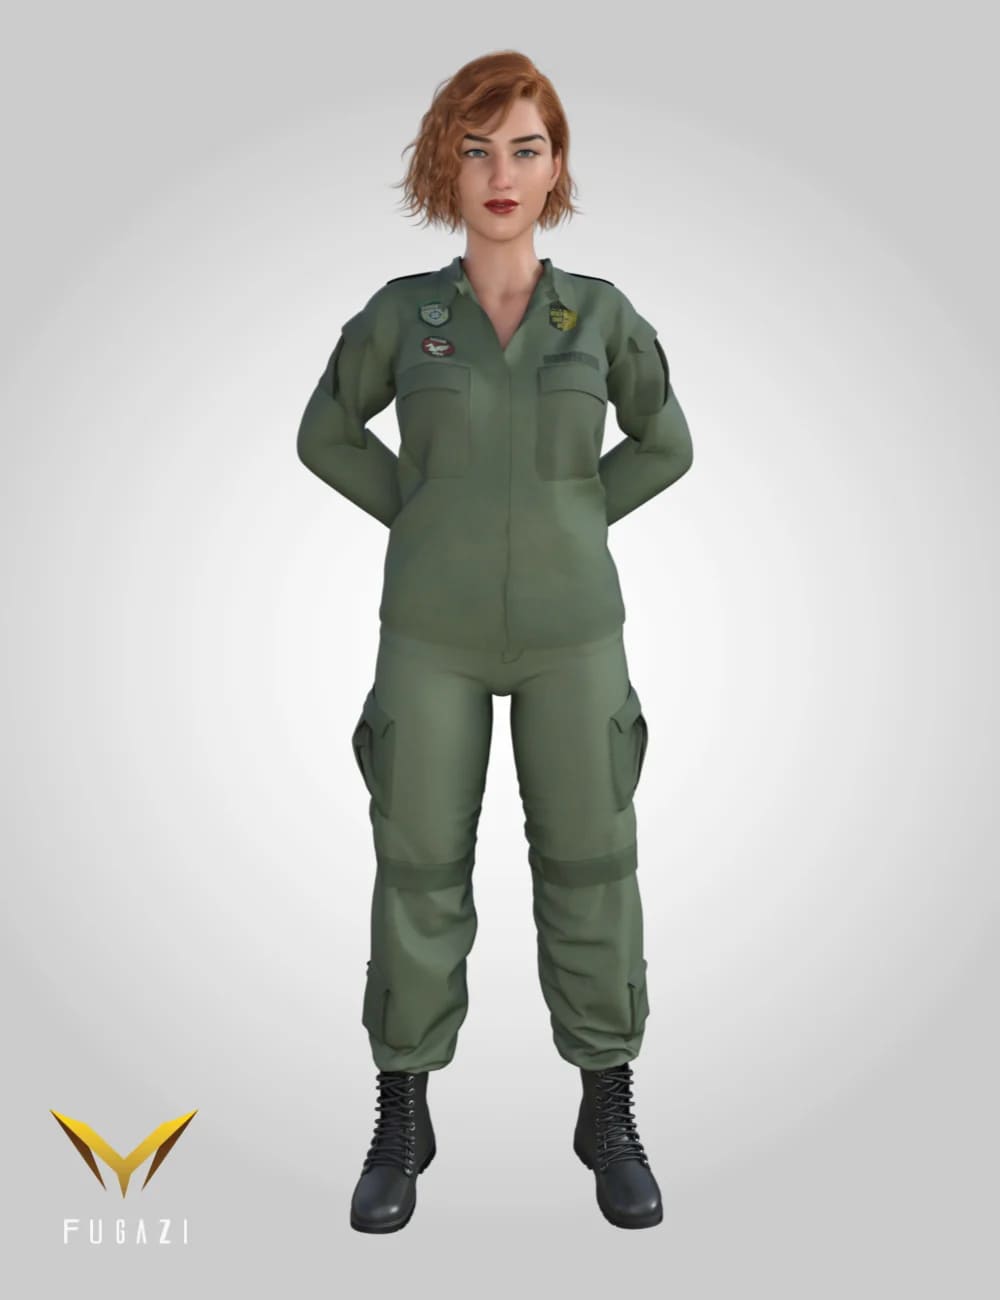 FG Military Outfit for Genesis 8.1 Female_DAZ3D下载站